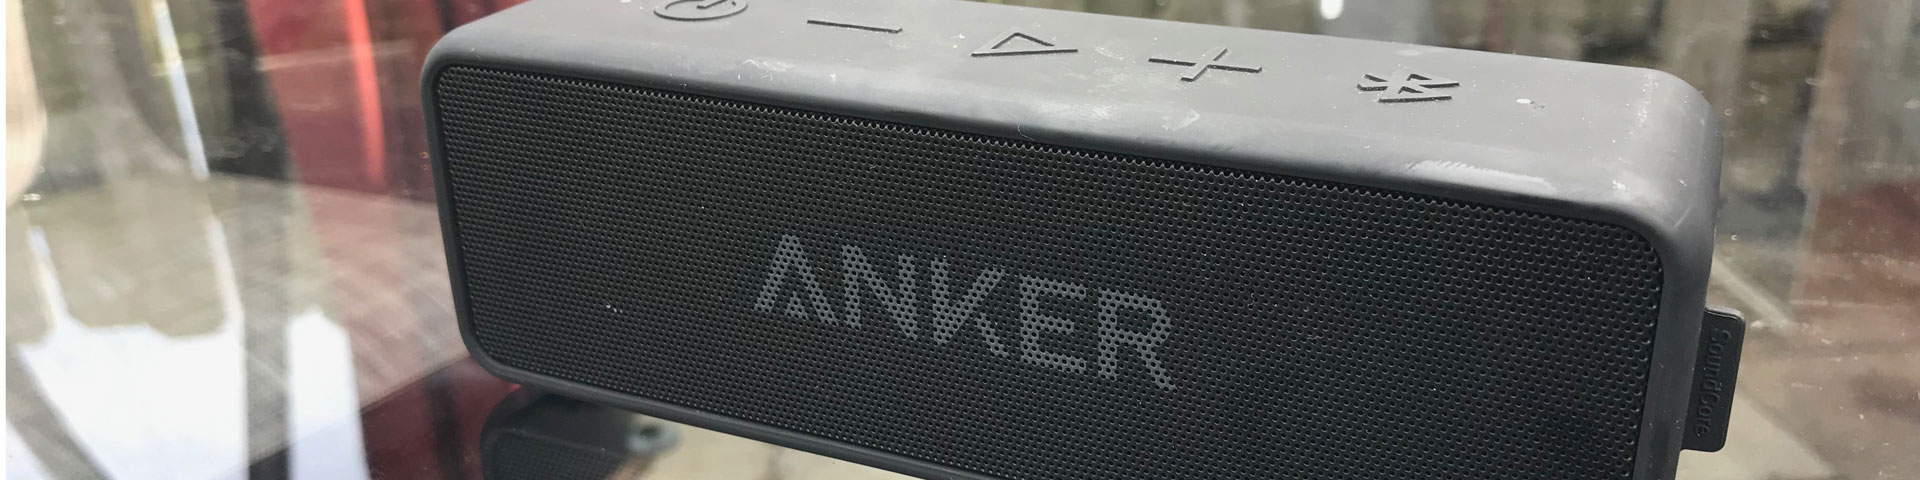 A close-up view of the black Anker speaker.